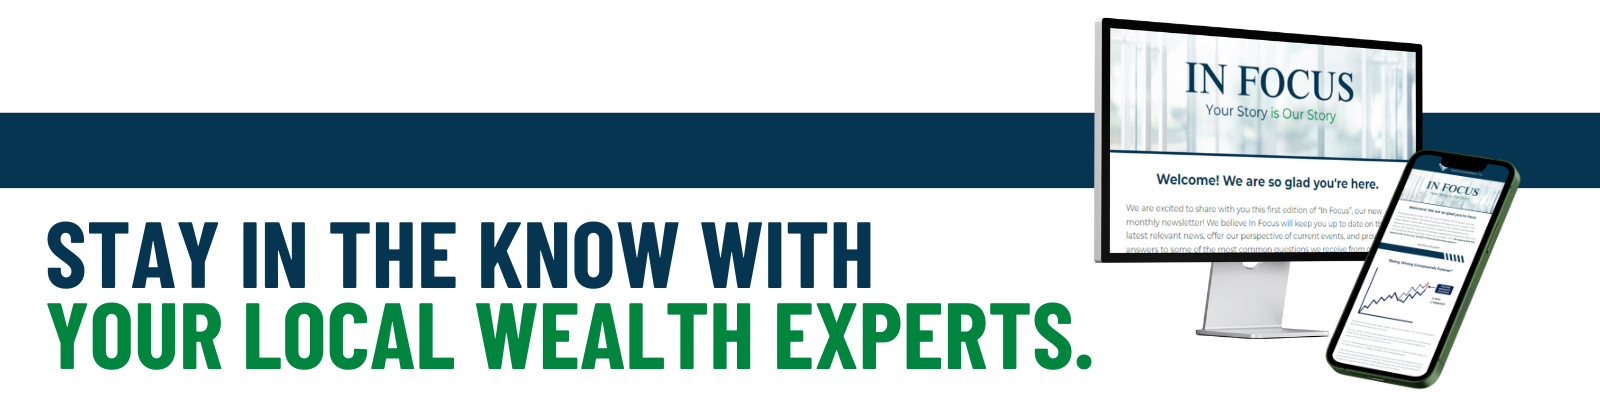 stay in the know with your local wealth experts